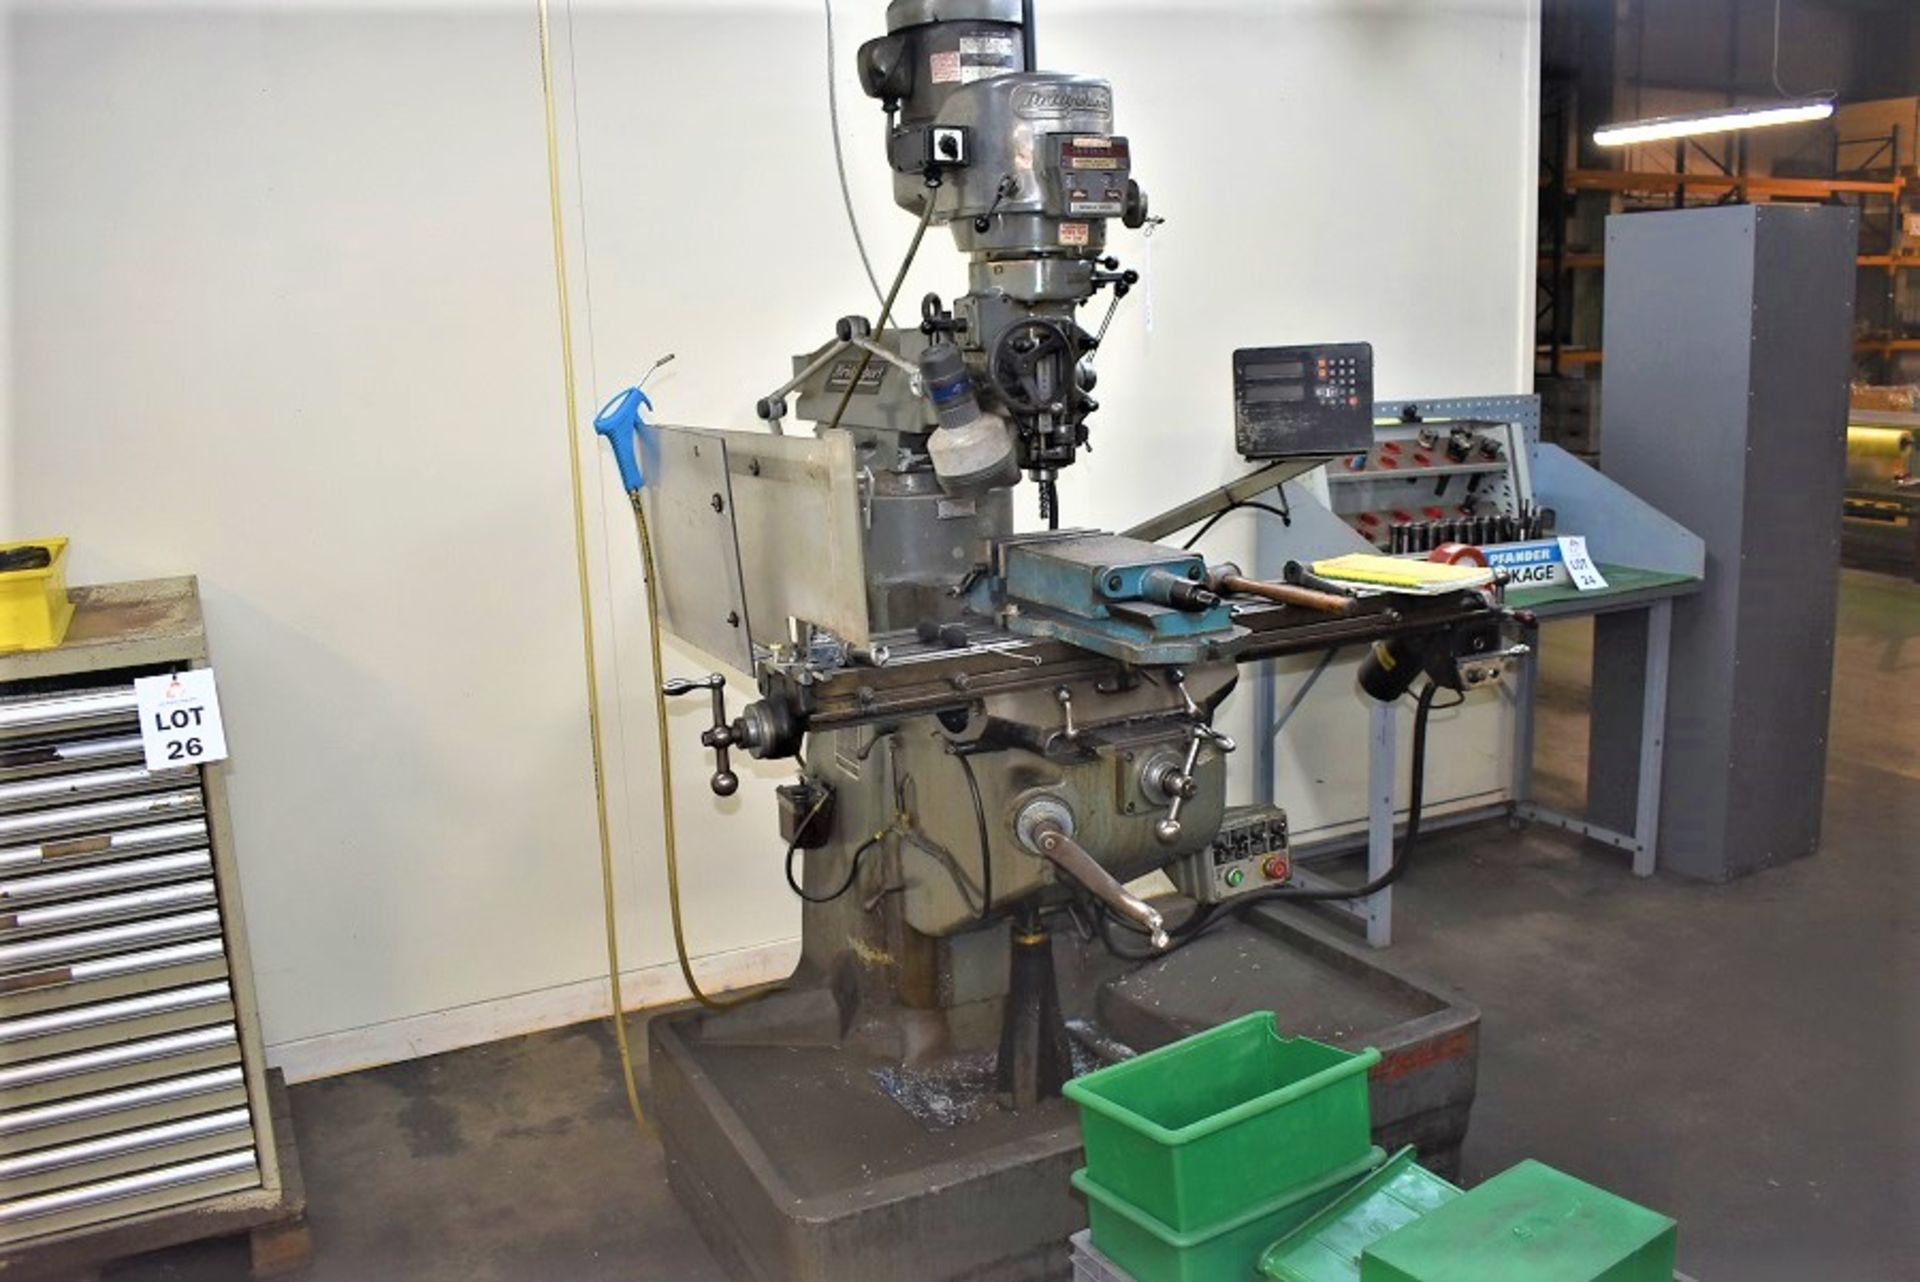 1 BRIDGEPORT SERIES 1 MILLING MACHINE WITH TWIN AXIS CONTROL & 8" MACHINE VICE - Image 2 of 2